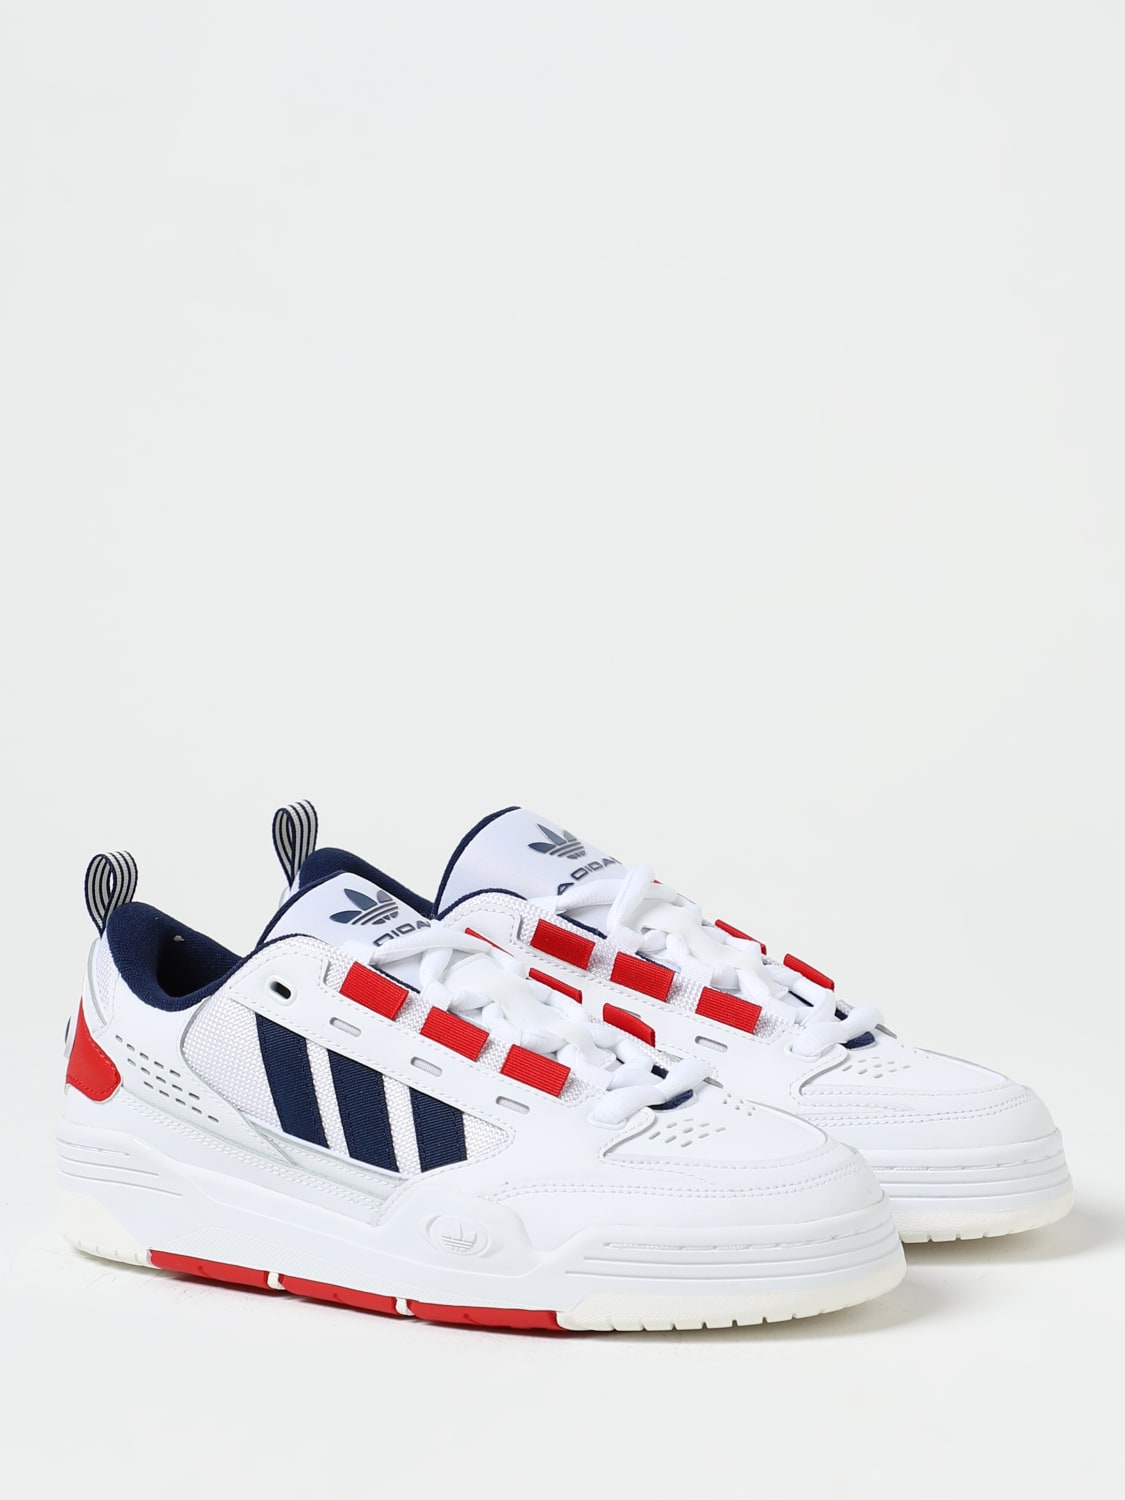 mesh Adidas Originals and ADIDAS sneakers in ORIGINALS: ADI2000 - at leather sneakers White | online ID2103